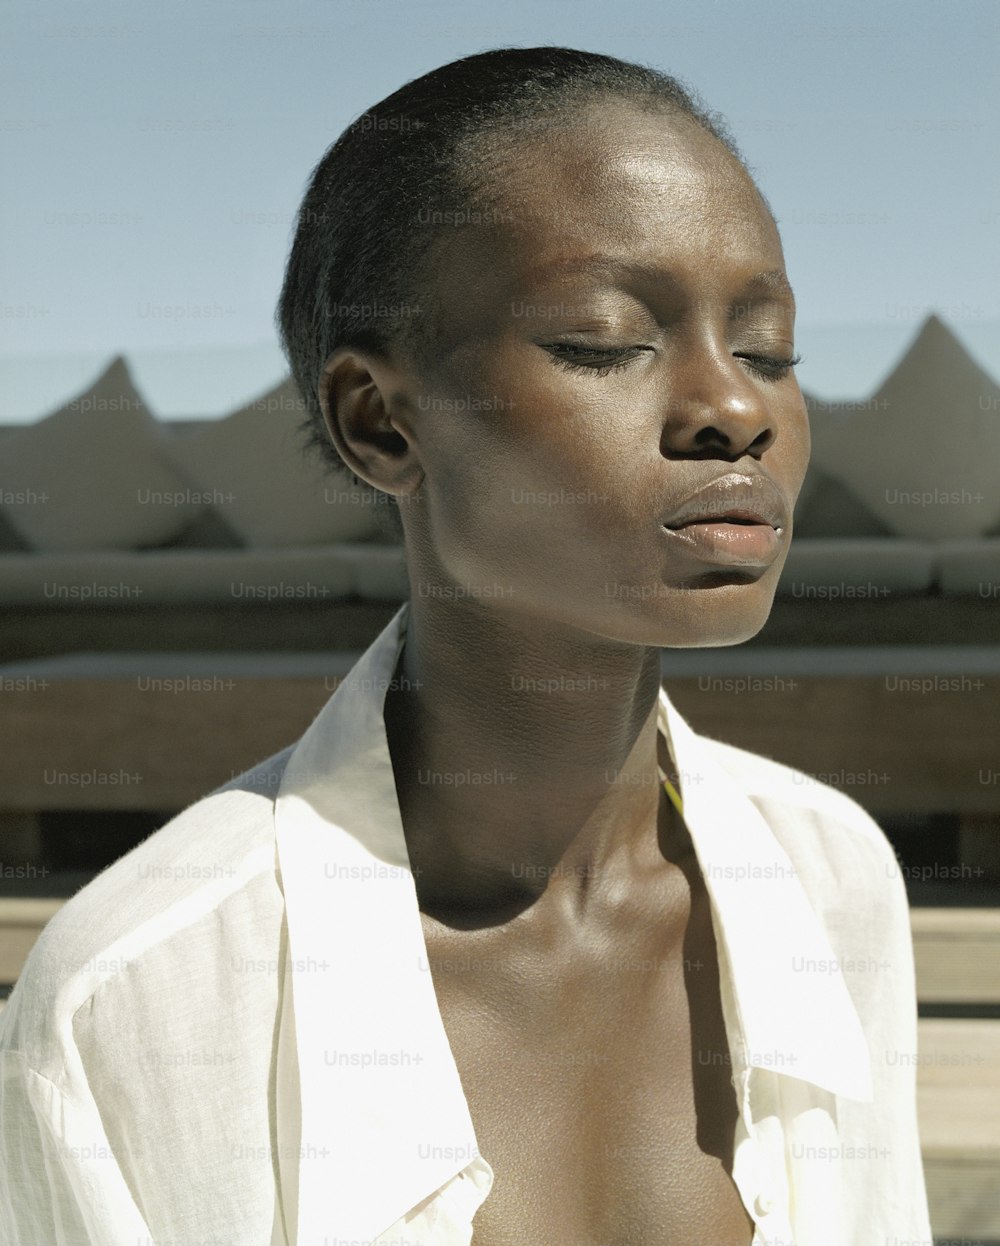 a woman with her eyes closed wearing a white shirt